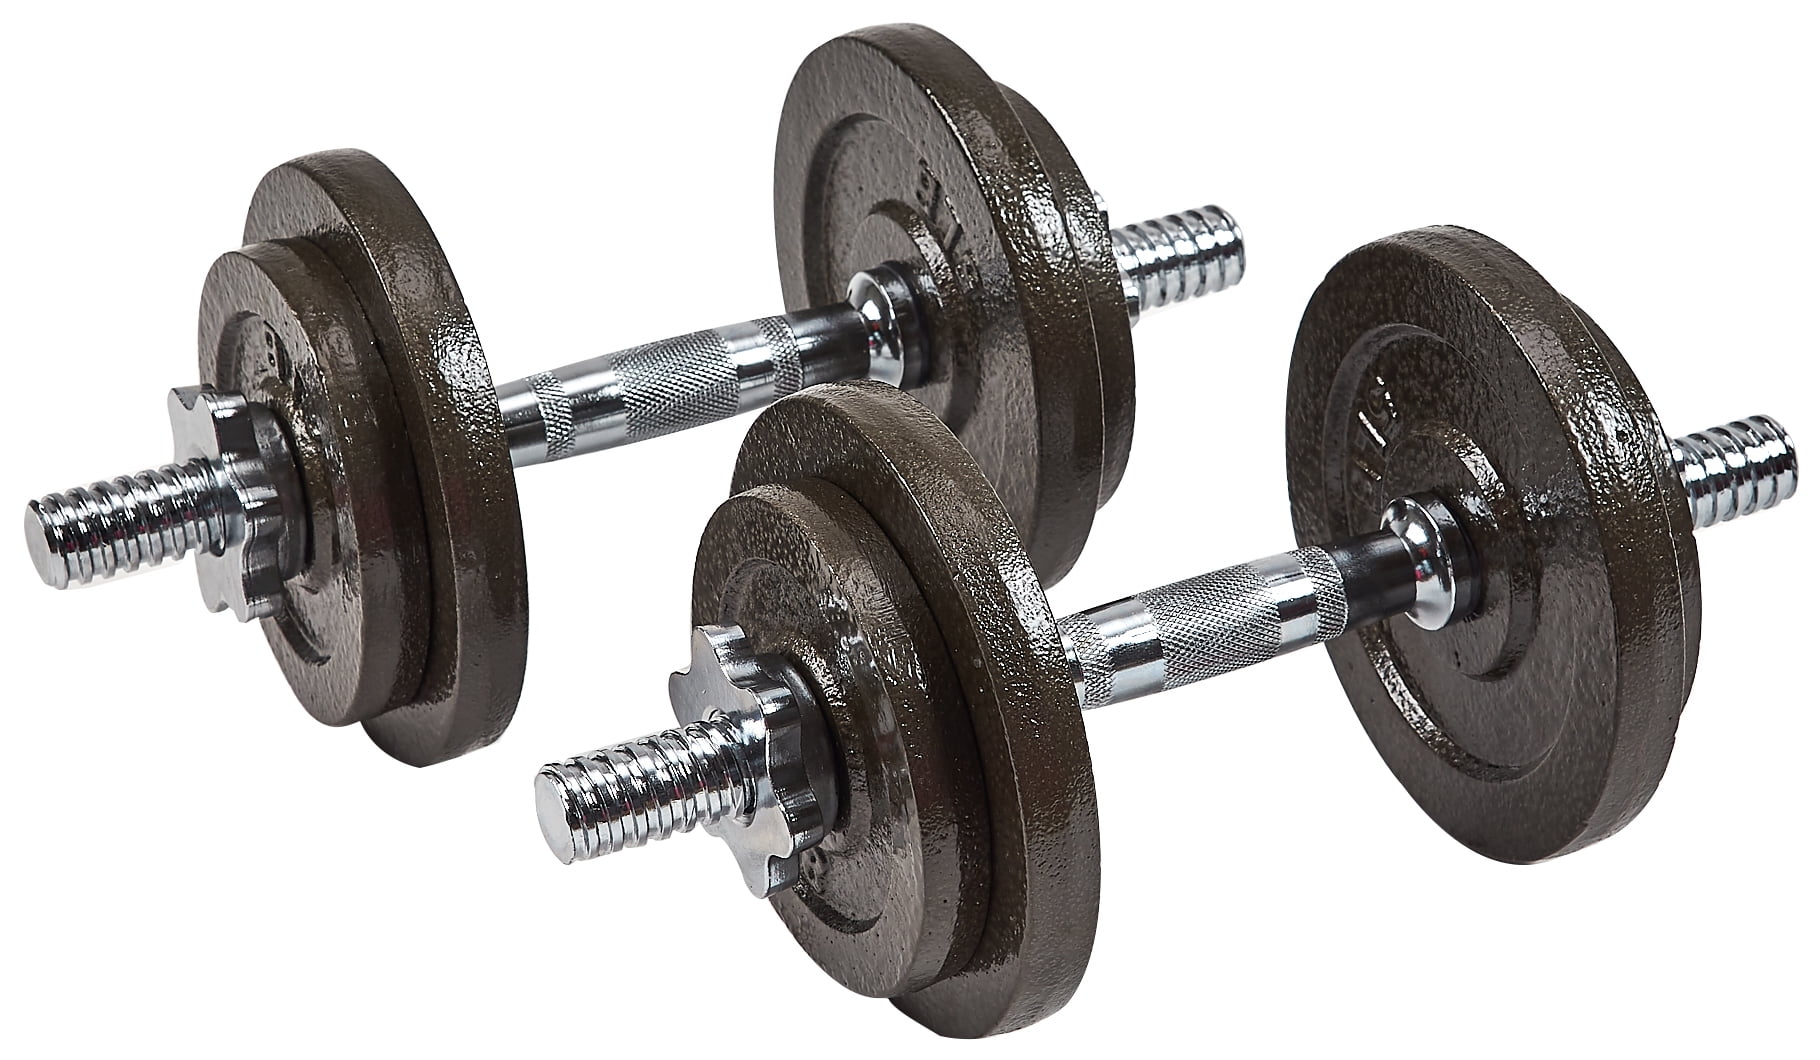 Details about   Detachble Fitness Round Dumbbells Barbell Plates Weight Lifting 22 66 Lbs 44 